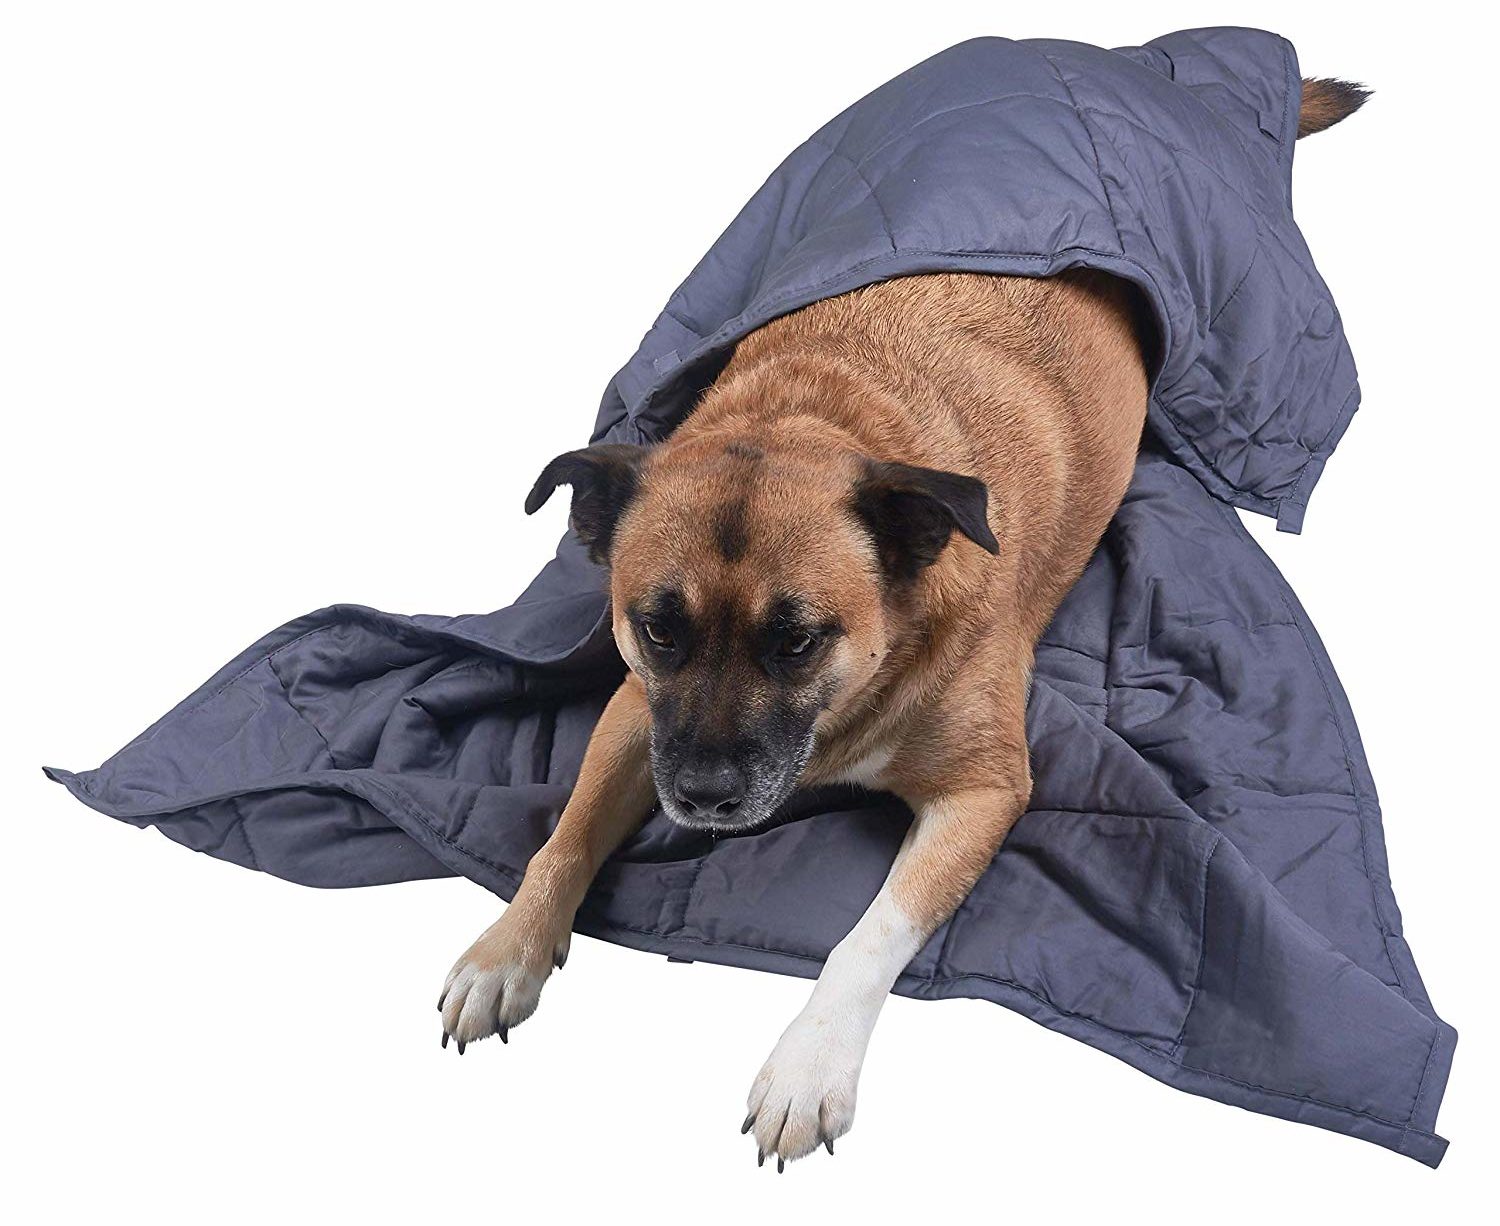 Best Gifts for Dog Lovers 2022: Weighted Anxiety Blanket for Christmas 2022